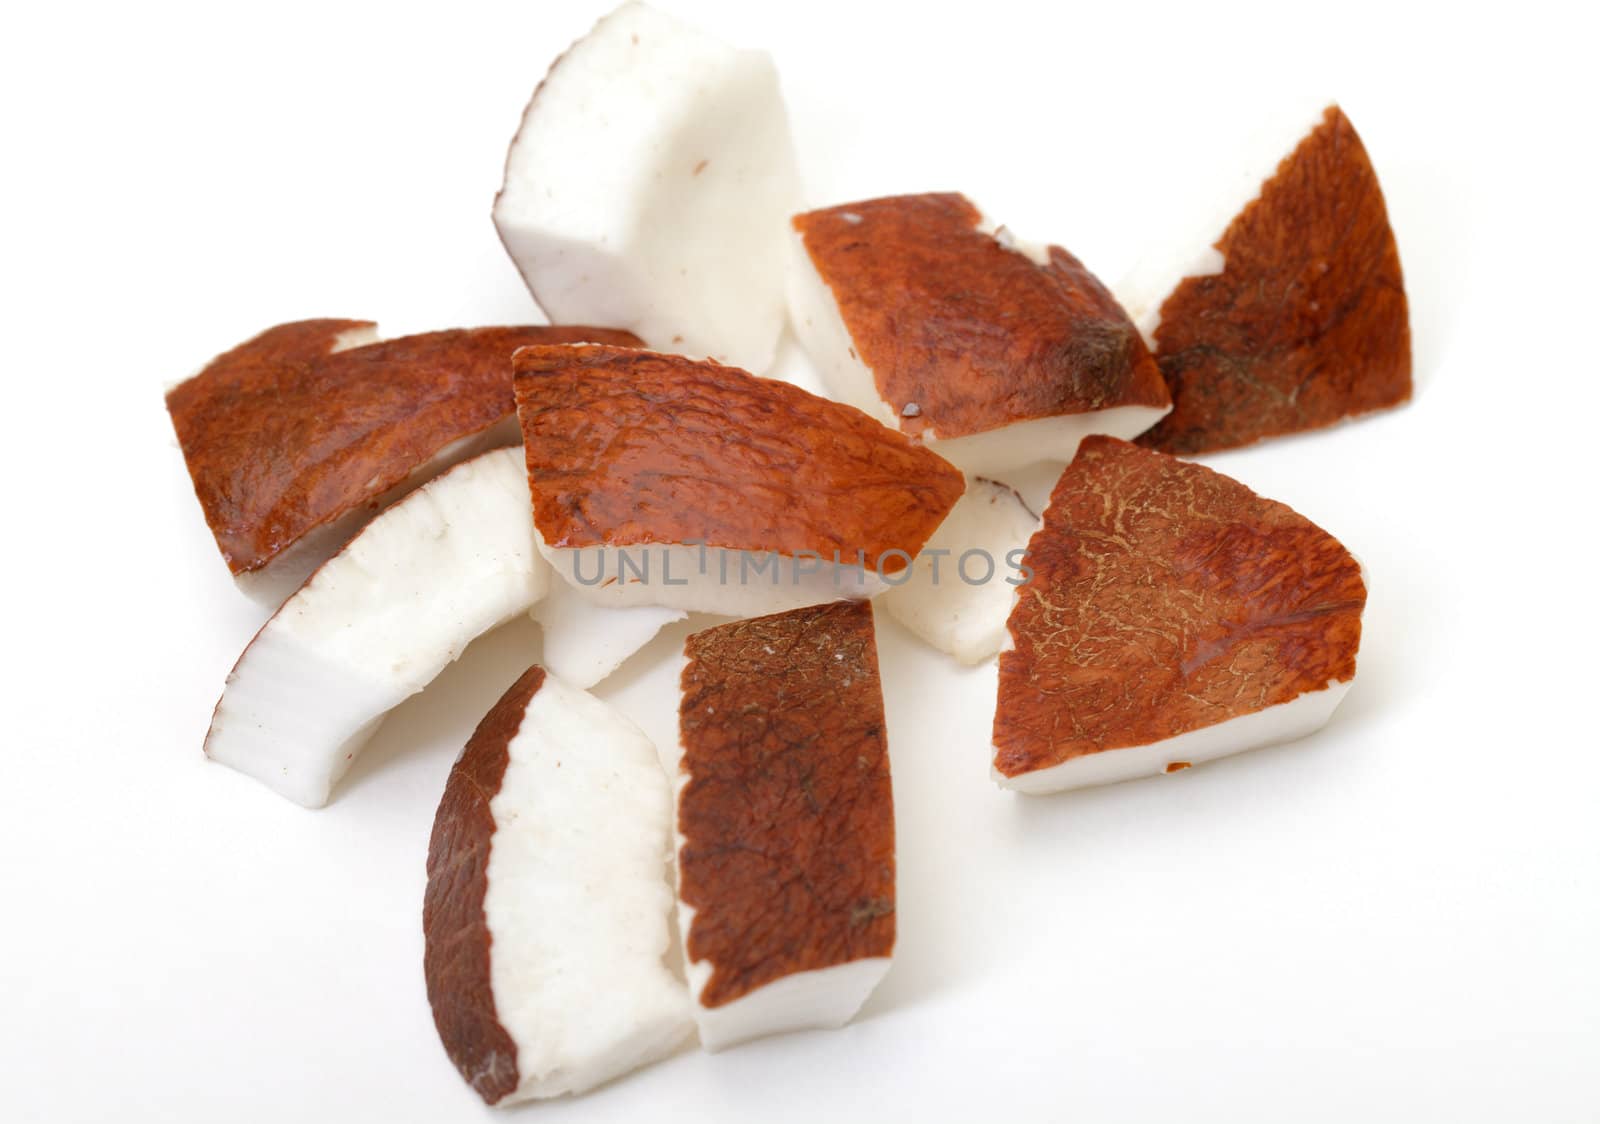 Pieces of coconut ob white background